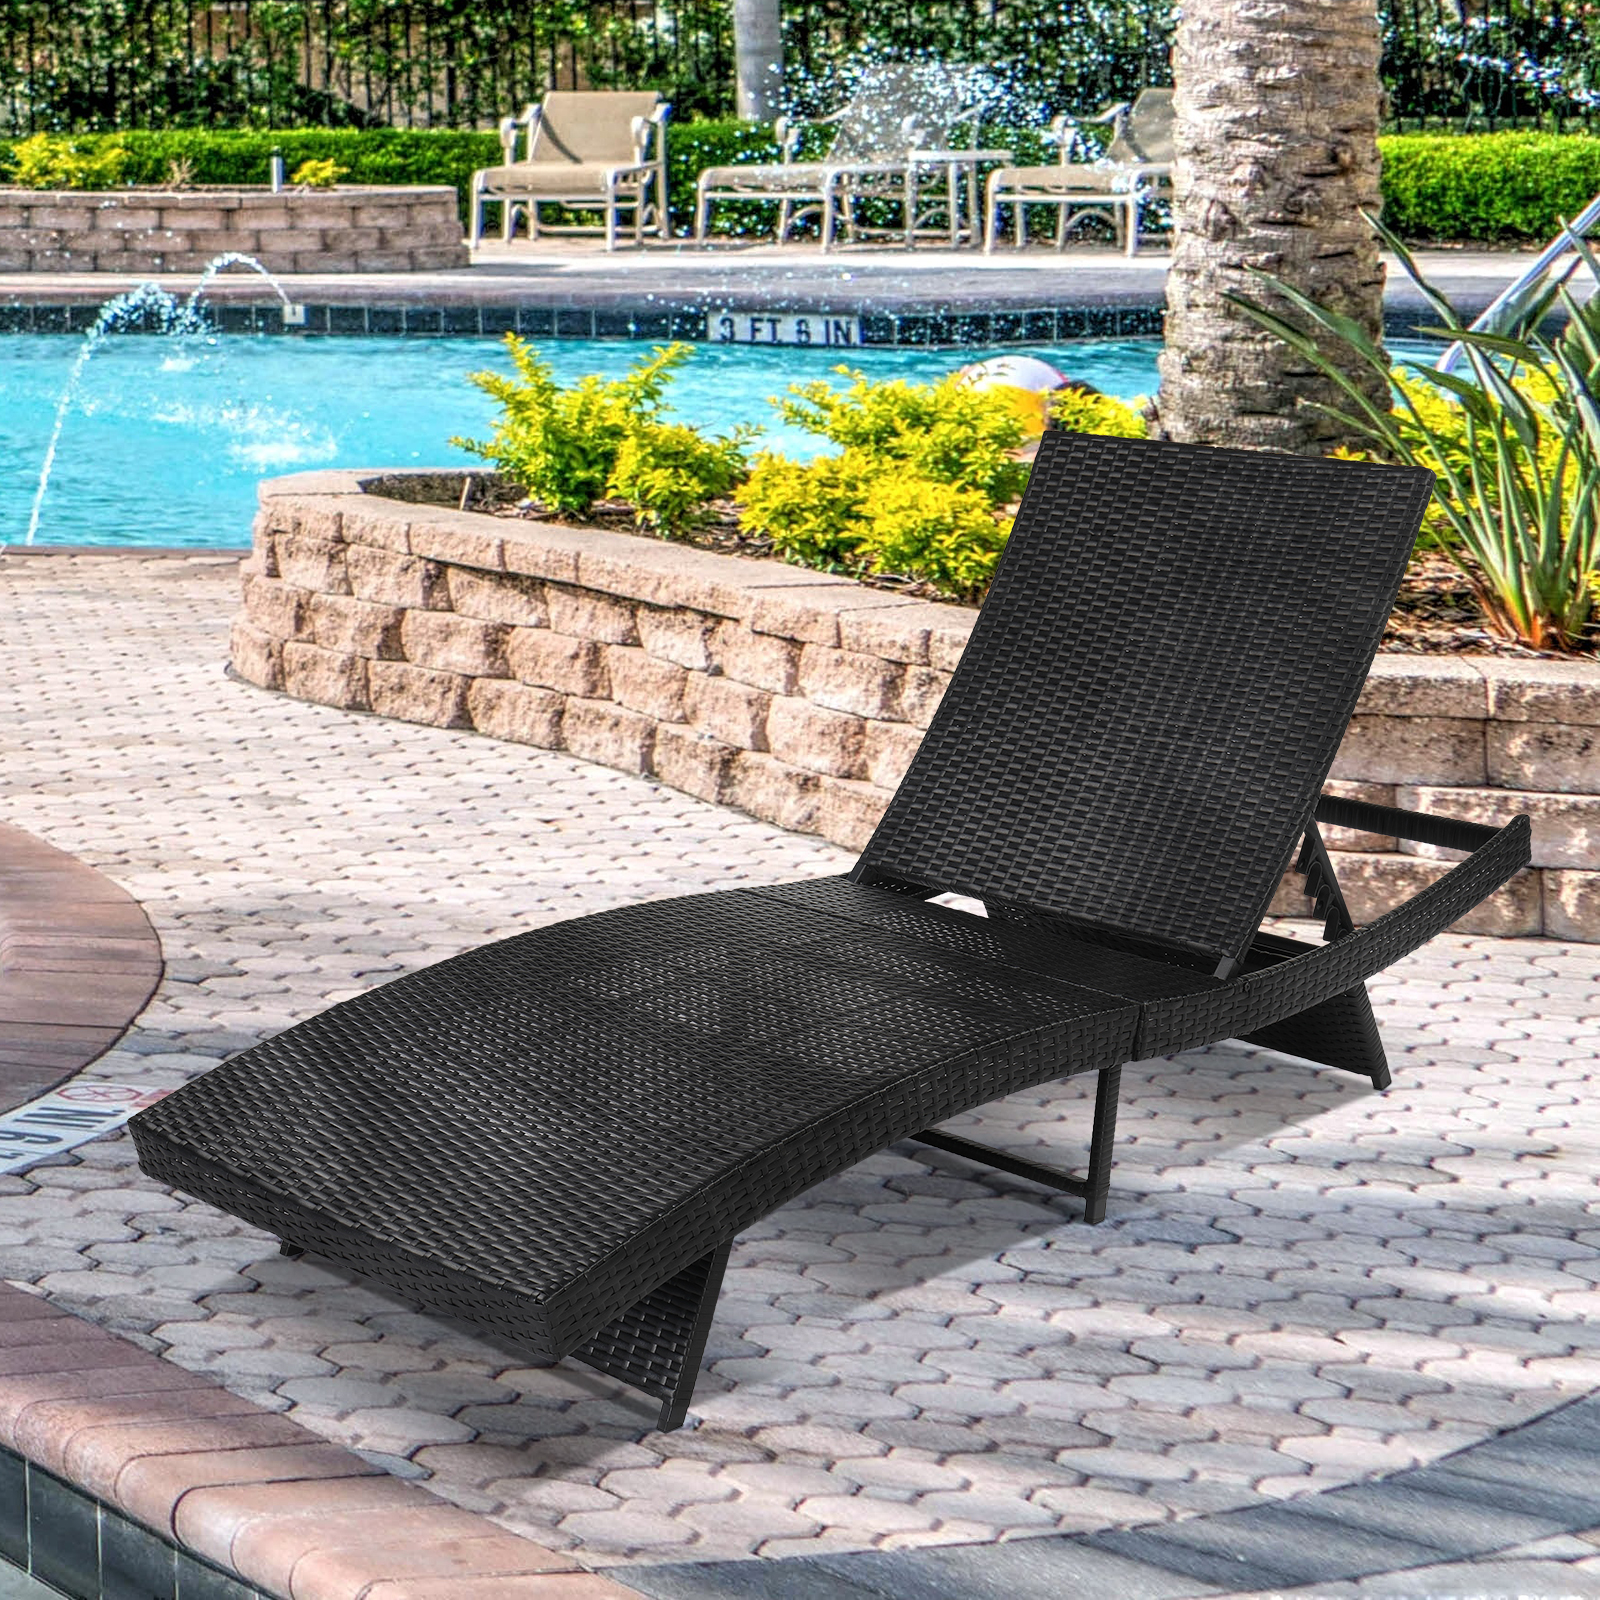 Seizeen Chaise Lounge Outdoor, Patio Rattan Lounge Chair 6-Position Adjustable, Poolside Sun Recliner Cushioned, Blue Cushions - image 3 of 11